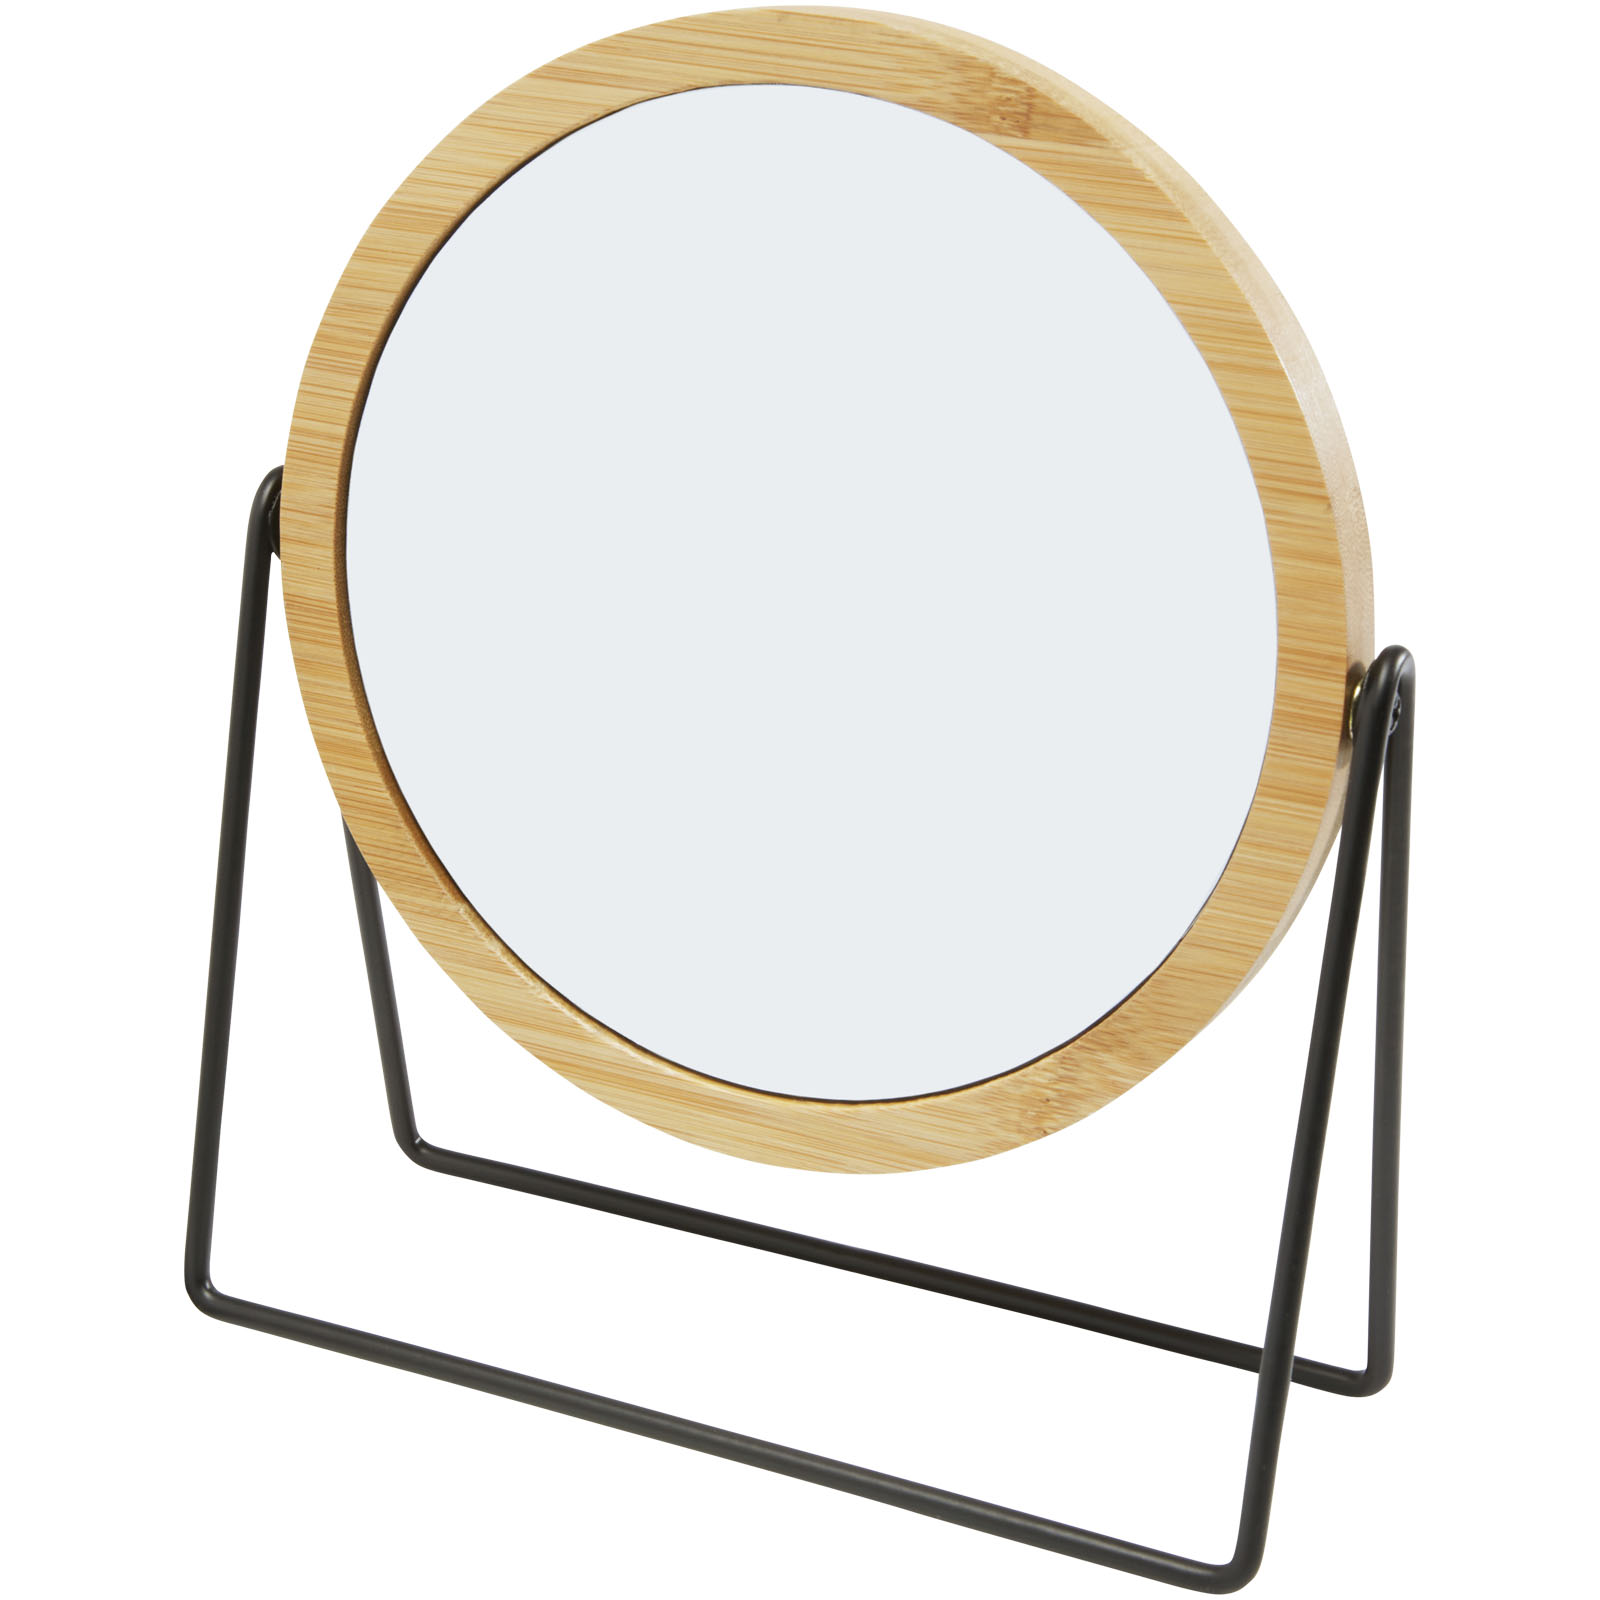 Health & Personal Care - Hyrra bamboo standing mirror